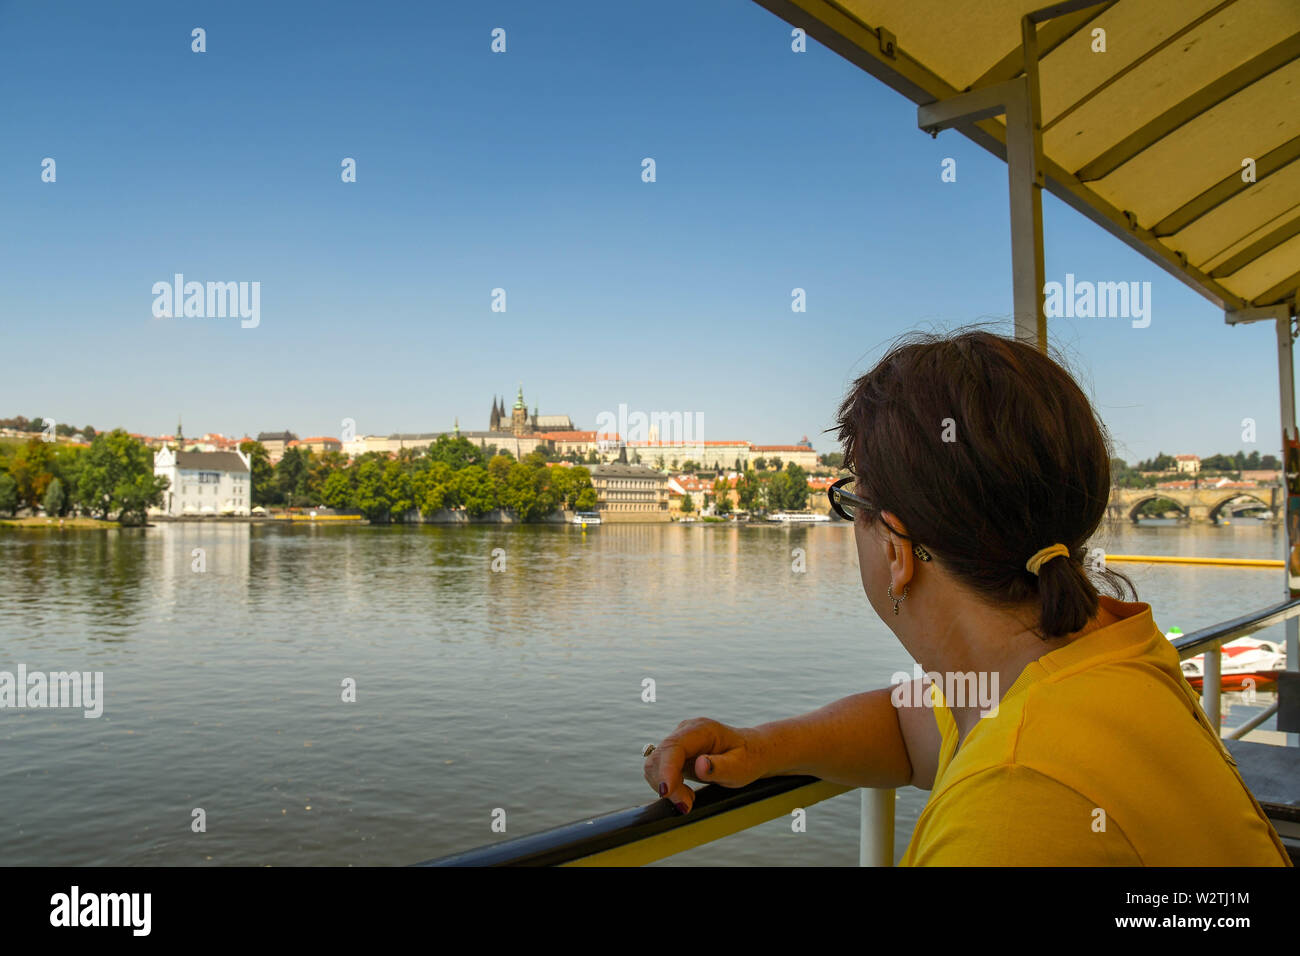 PRAGUE, CZECH REPUBLIC - AUGUST 2018: Person on a river cruise boat looking out over the River Vltava to the skyline of Prague. Stock Photo